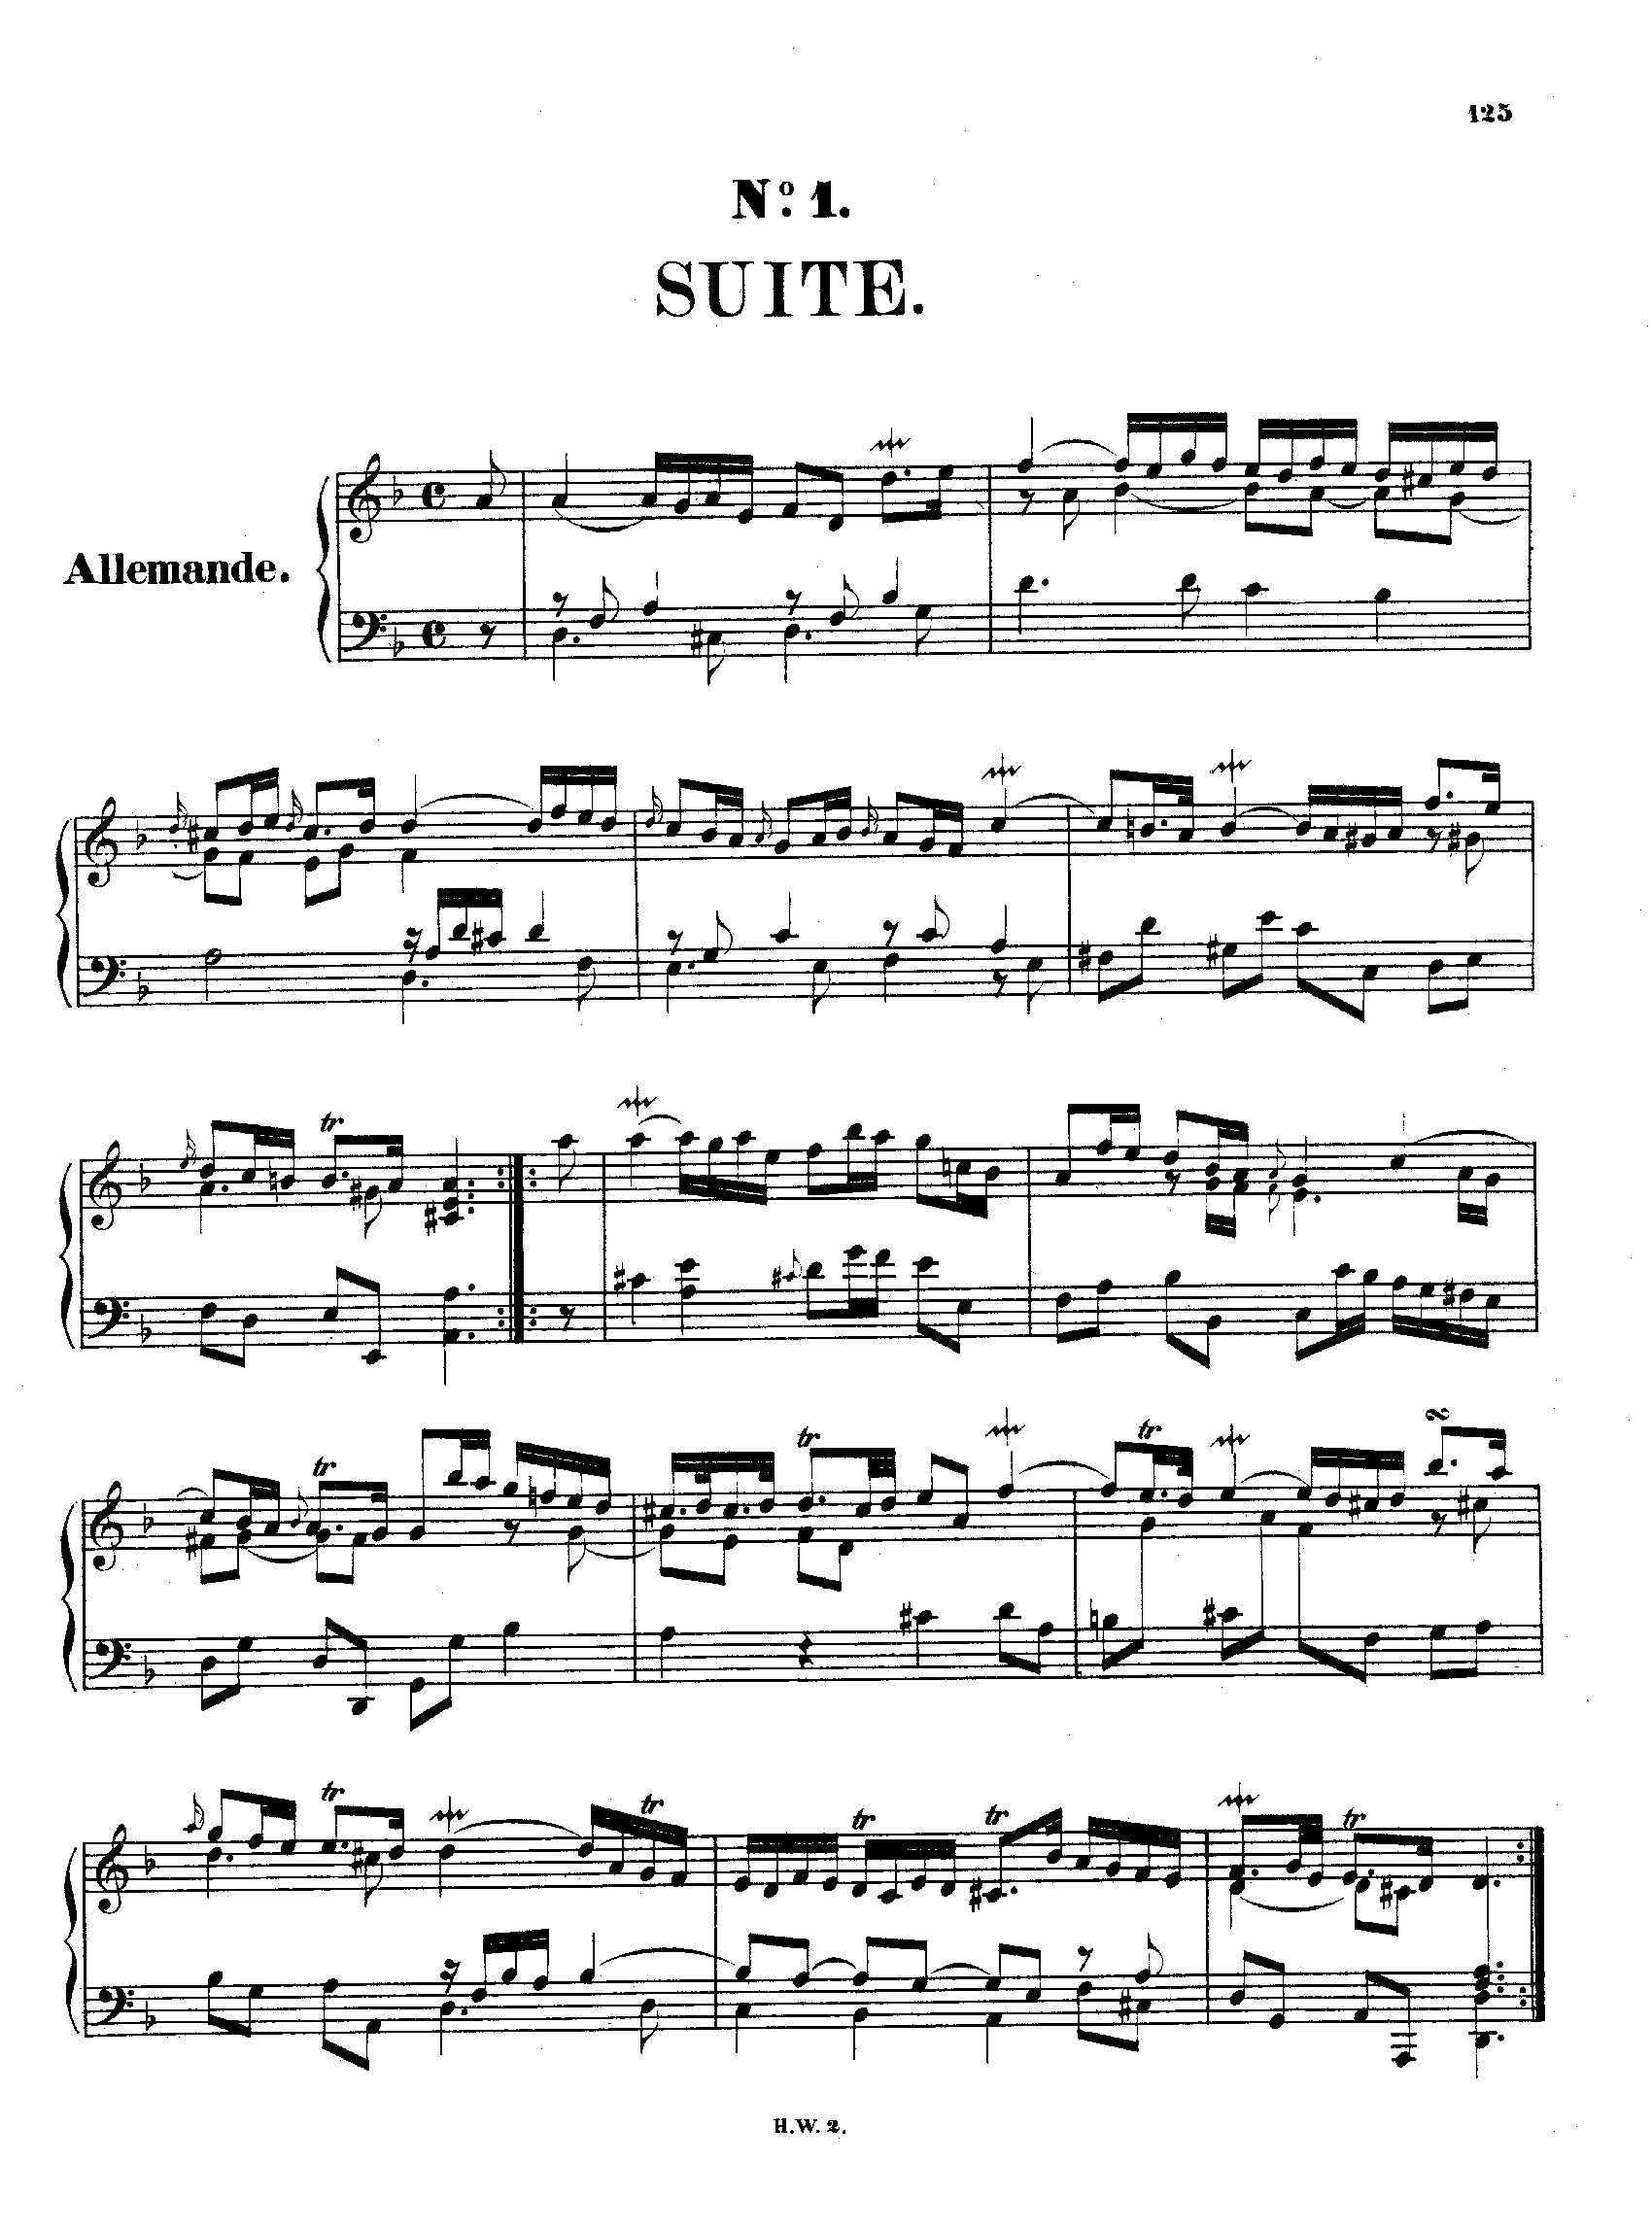 Handel, George Frideric - Suite, HWV 447 Sheet music for Piano - 8notes.com